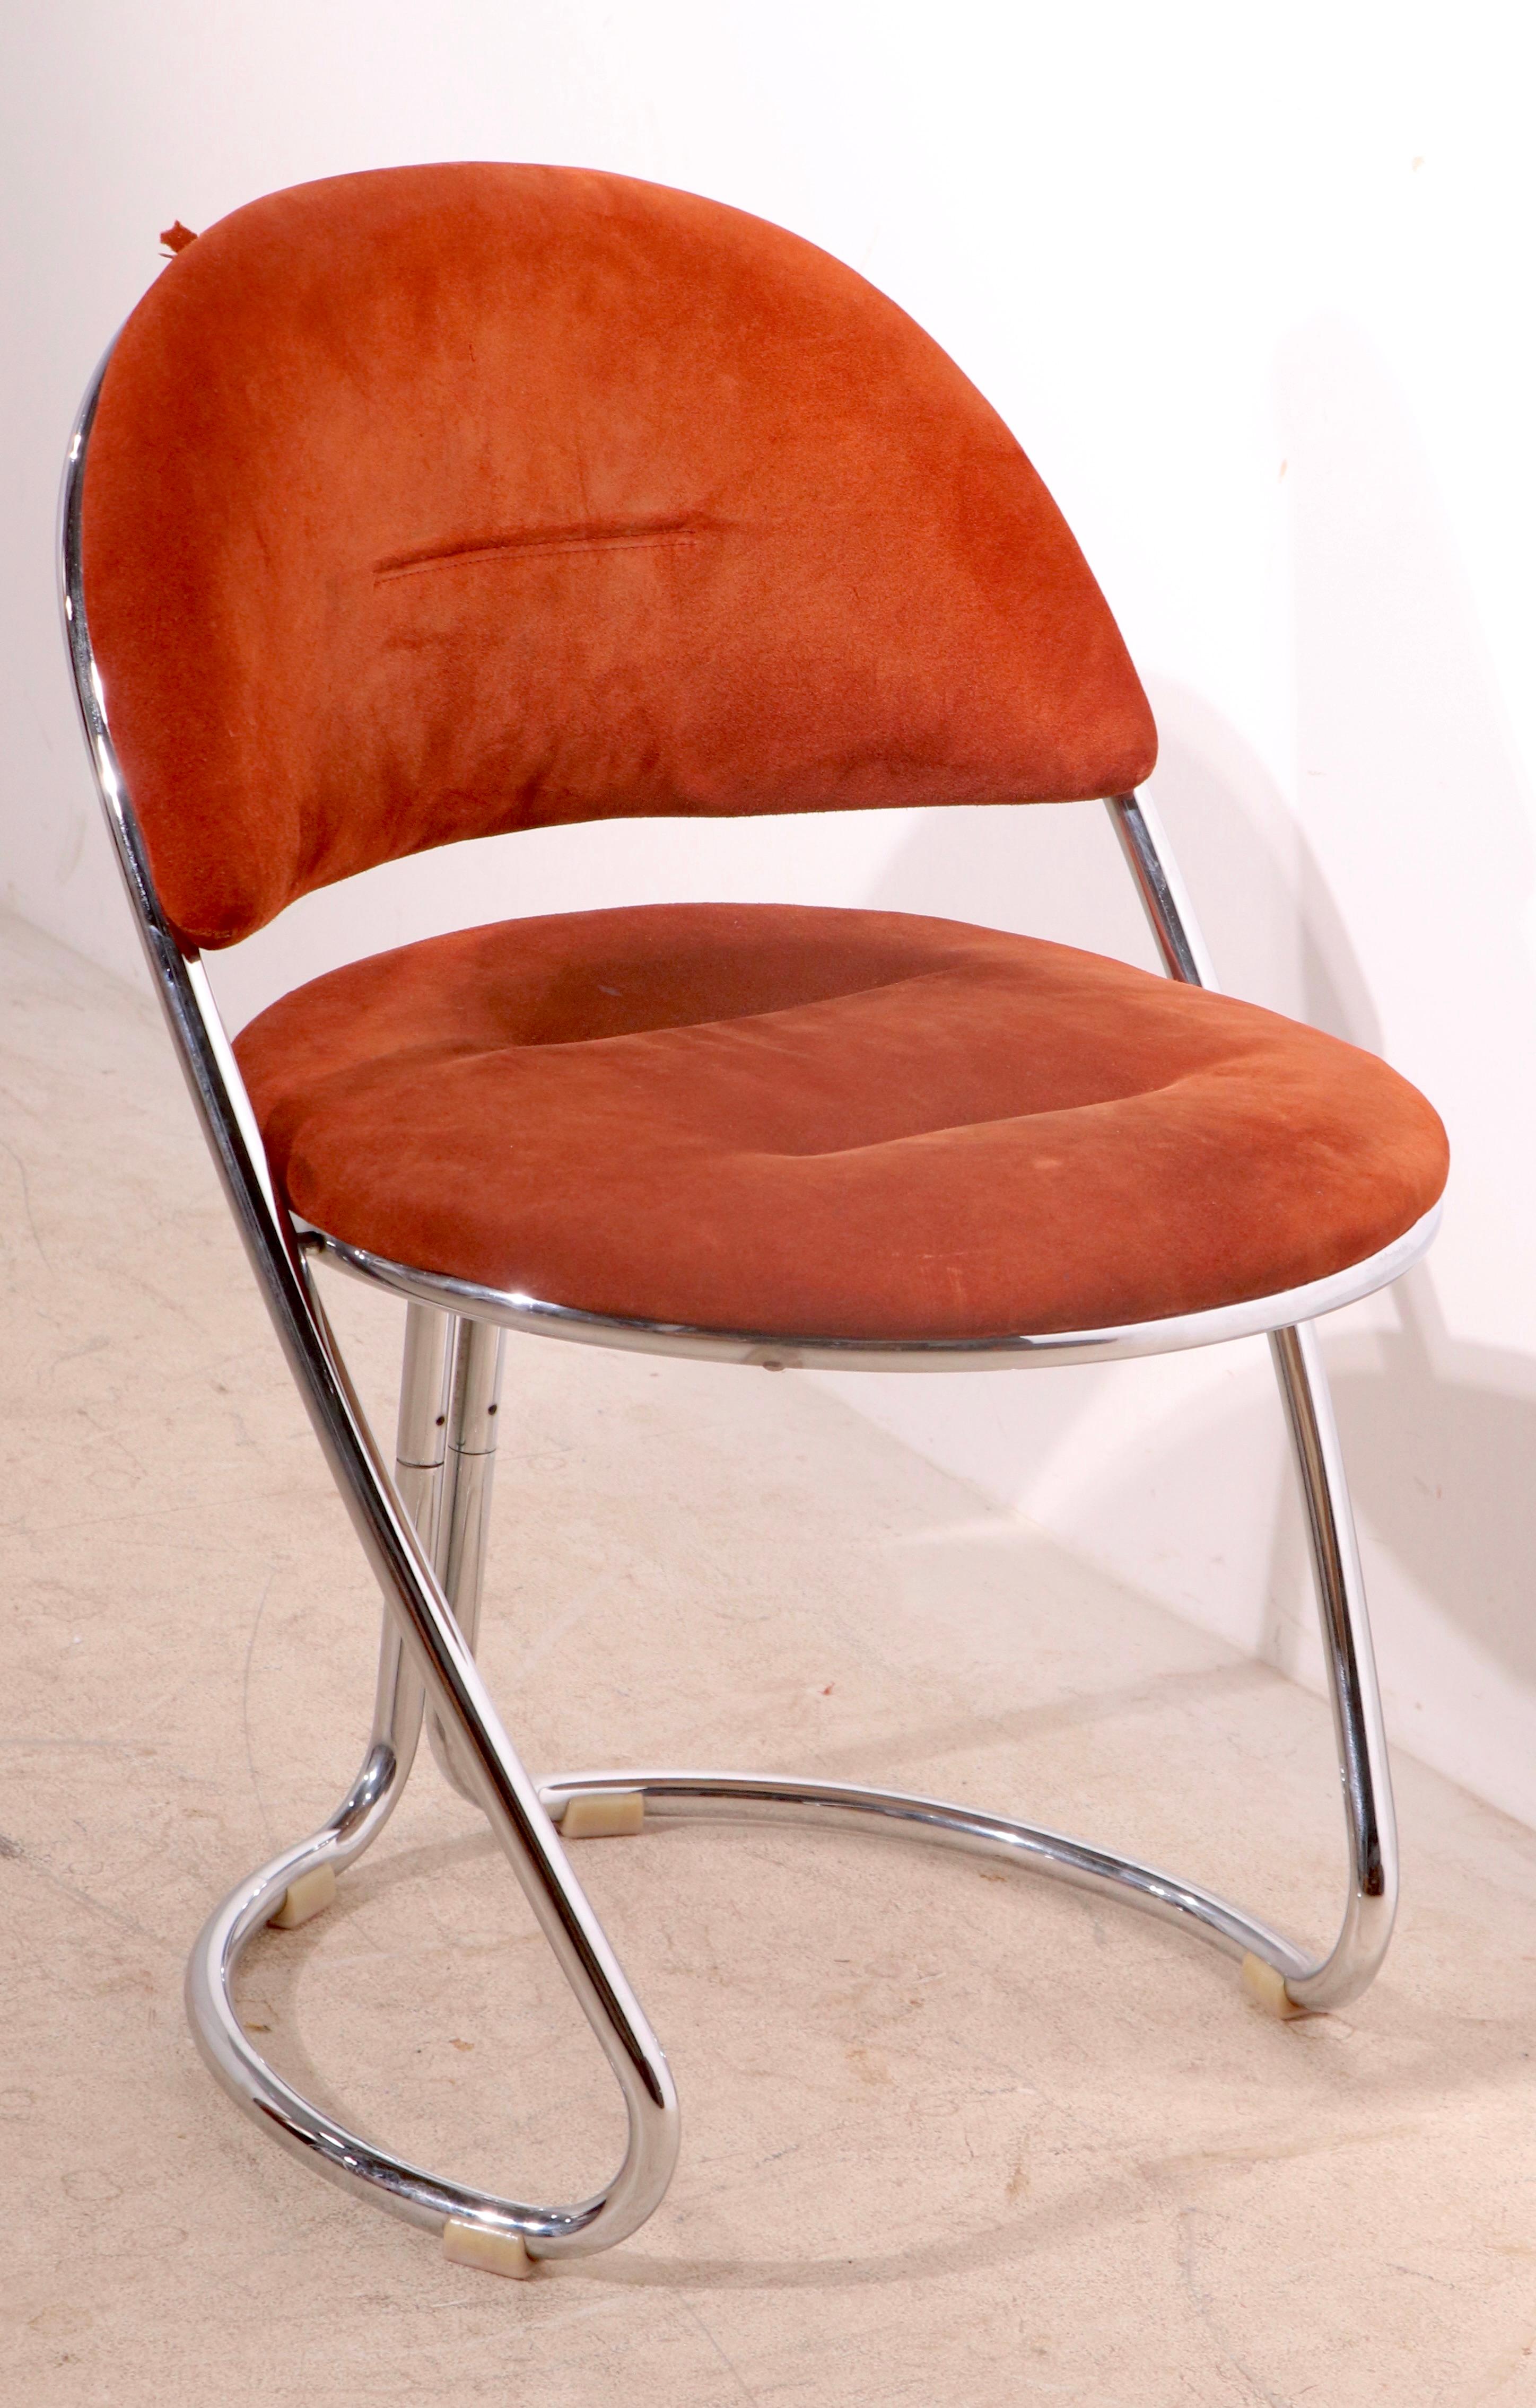 Dramatic post modern side, or dining chair, made in Italy, circa 1970’s, attributed to Giotto Stoppino. The chair features a bright tubular chrome frame, with an ultra suede upholstered back, and seat ( upholstery as is ). This example is